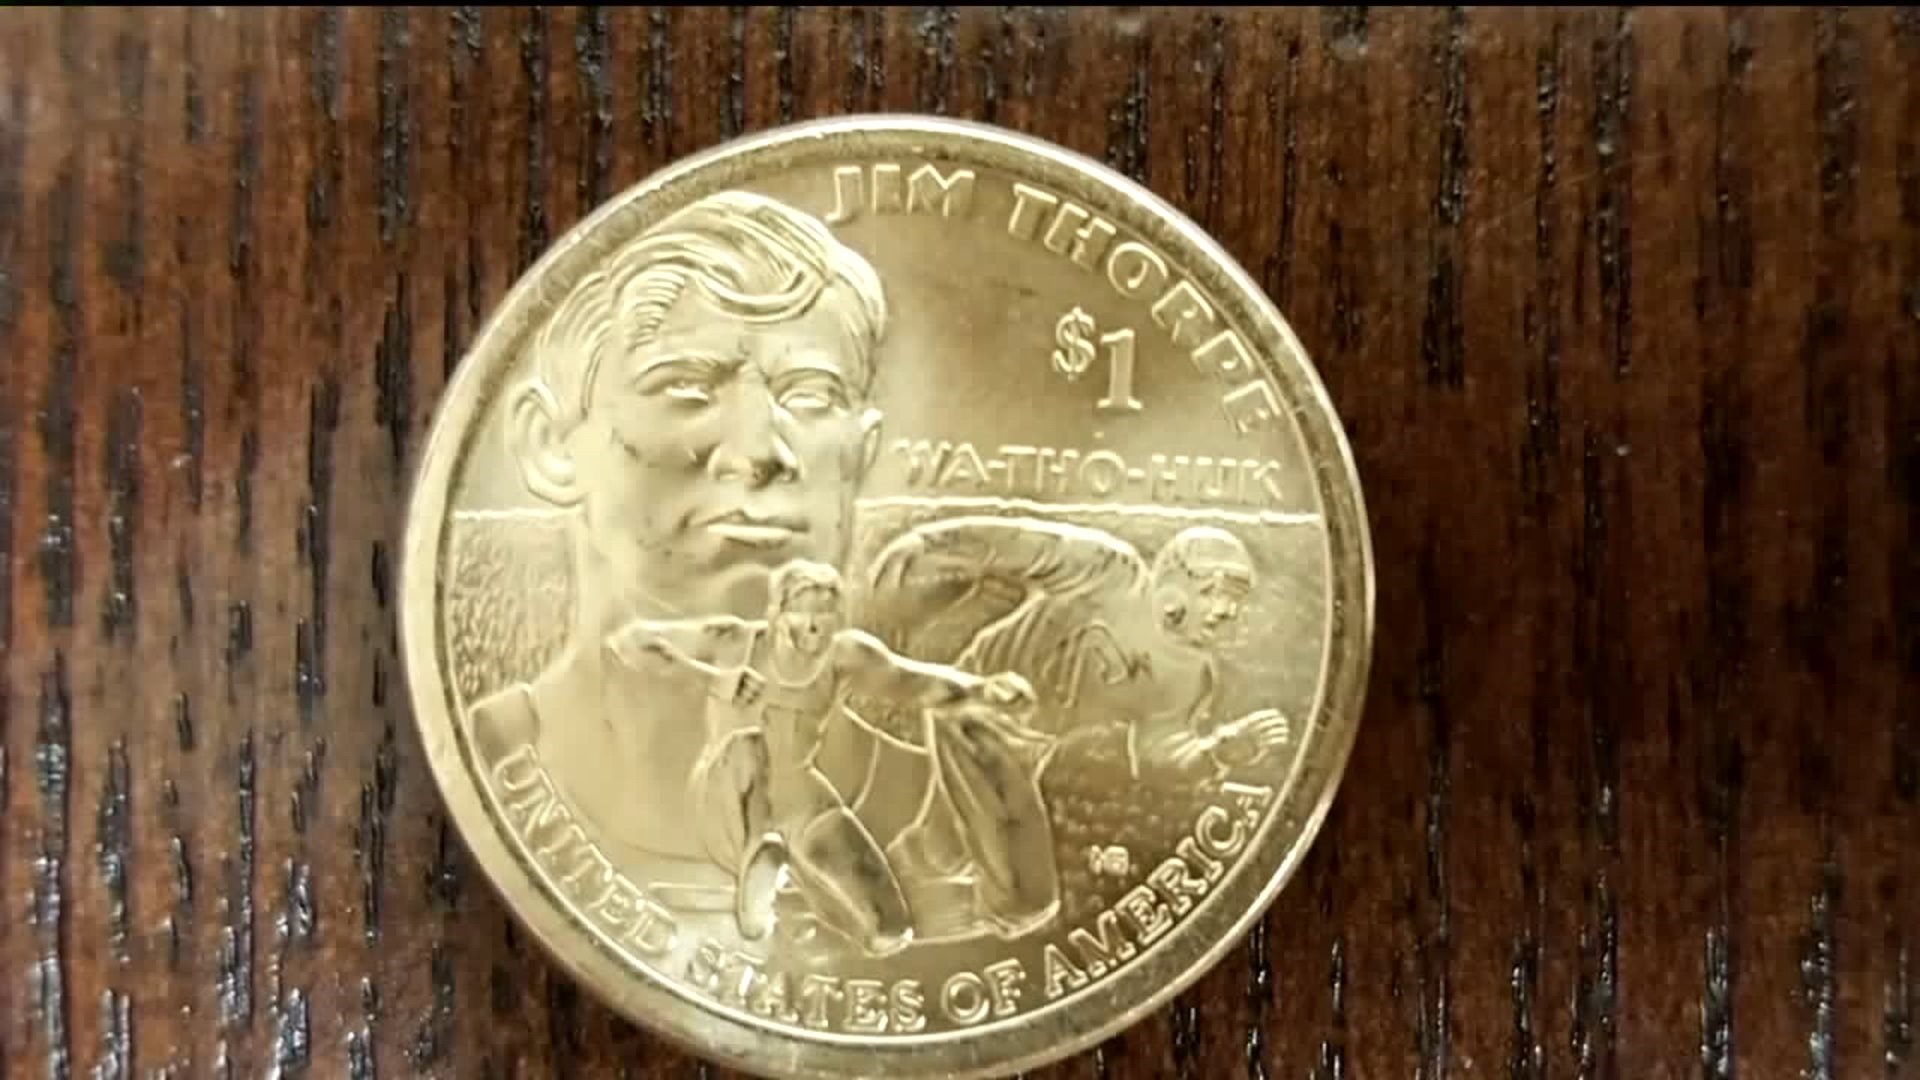 Native American Coin Features Jim Thorpe